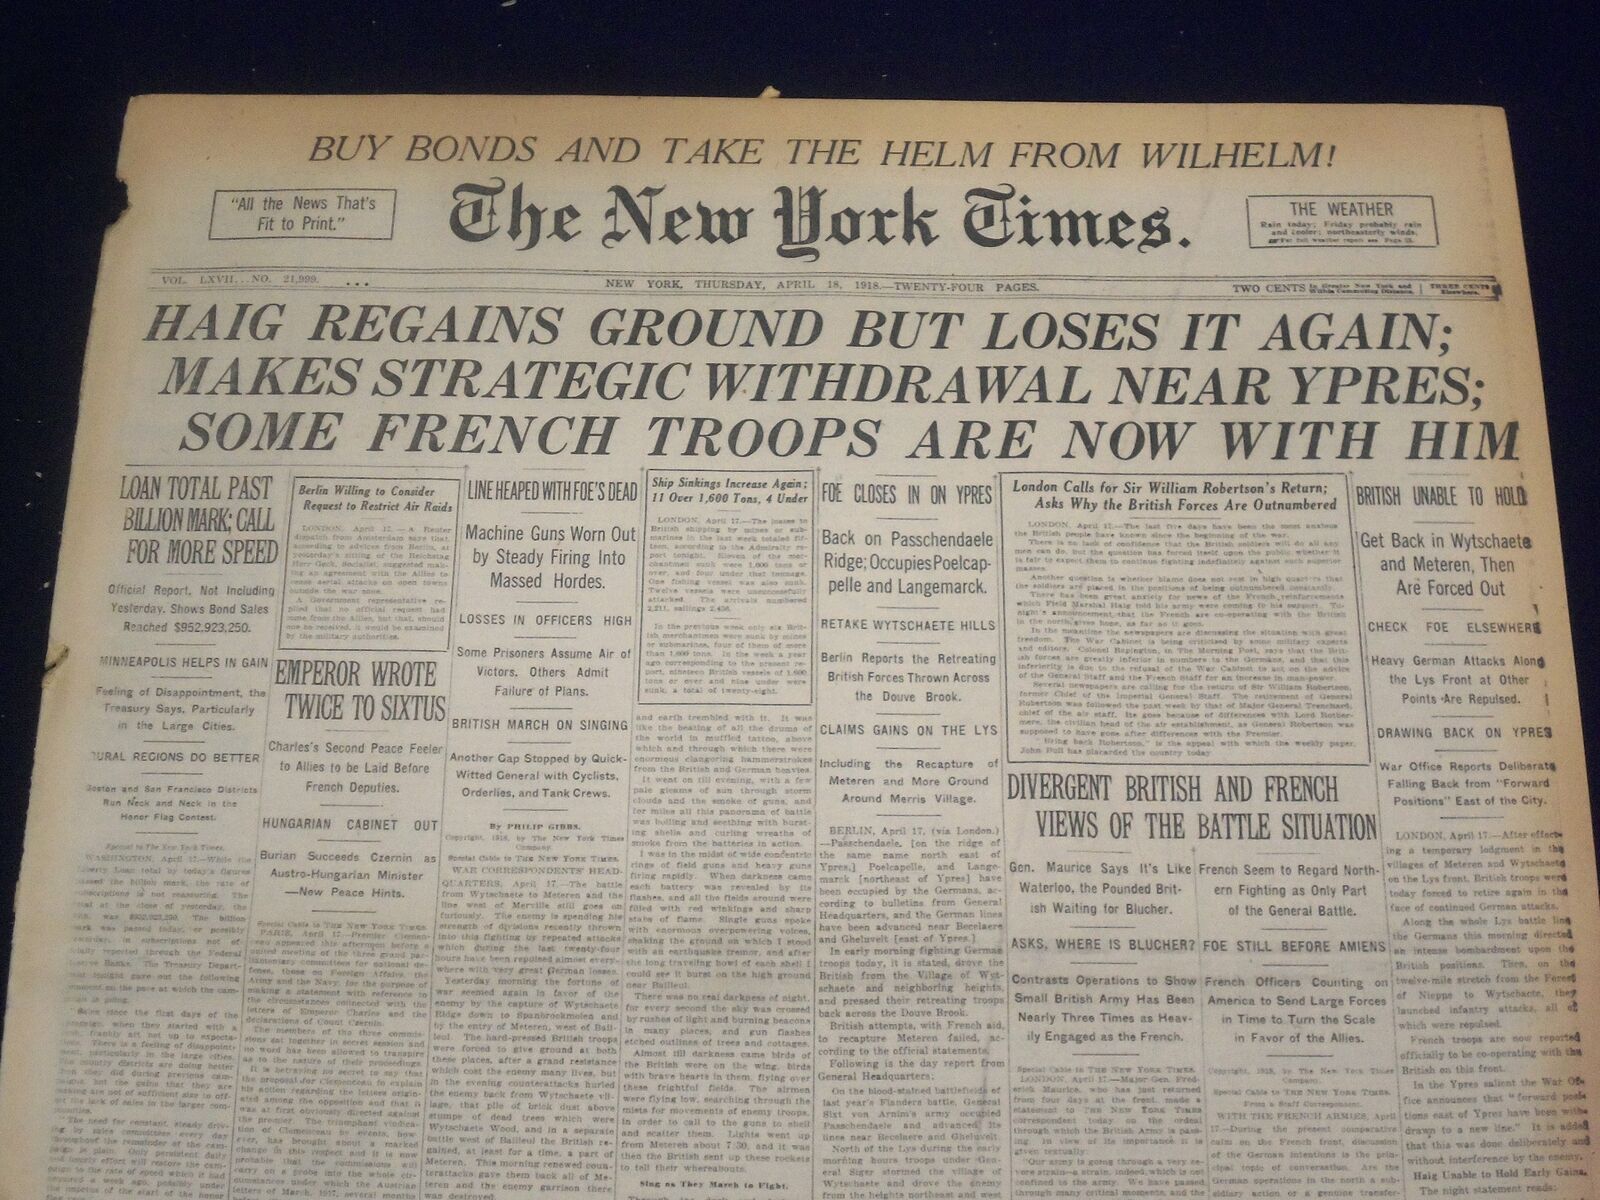 1918 APRIL 18 NEW YORK TIMES - HAIG REGAINS GROUND BUT LOSES IT AGAIN - NT 8224